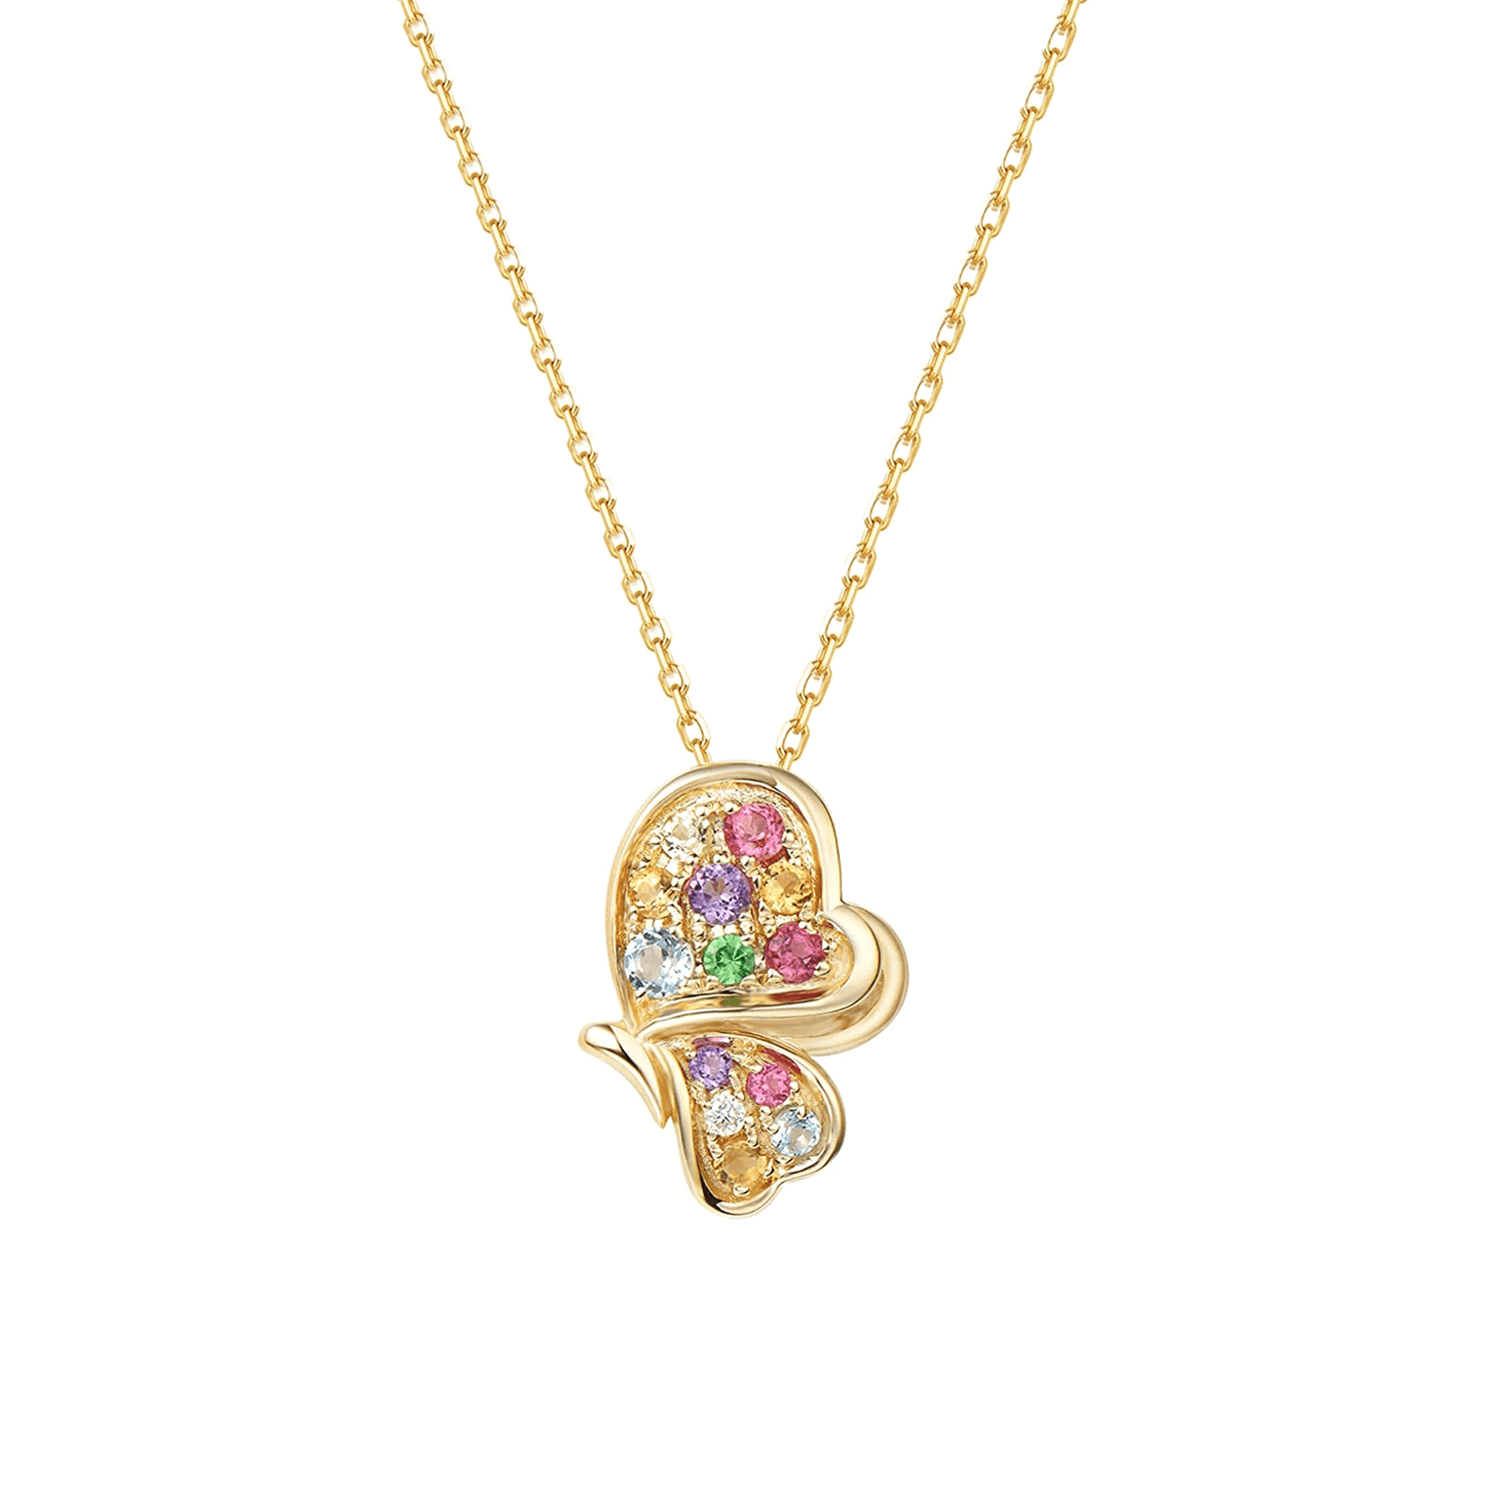 FANCIME "Magical Dream" Color Gemstone Butterfly 14K Yellow Gold Necklace Main